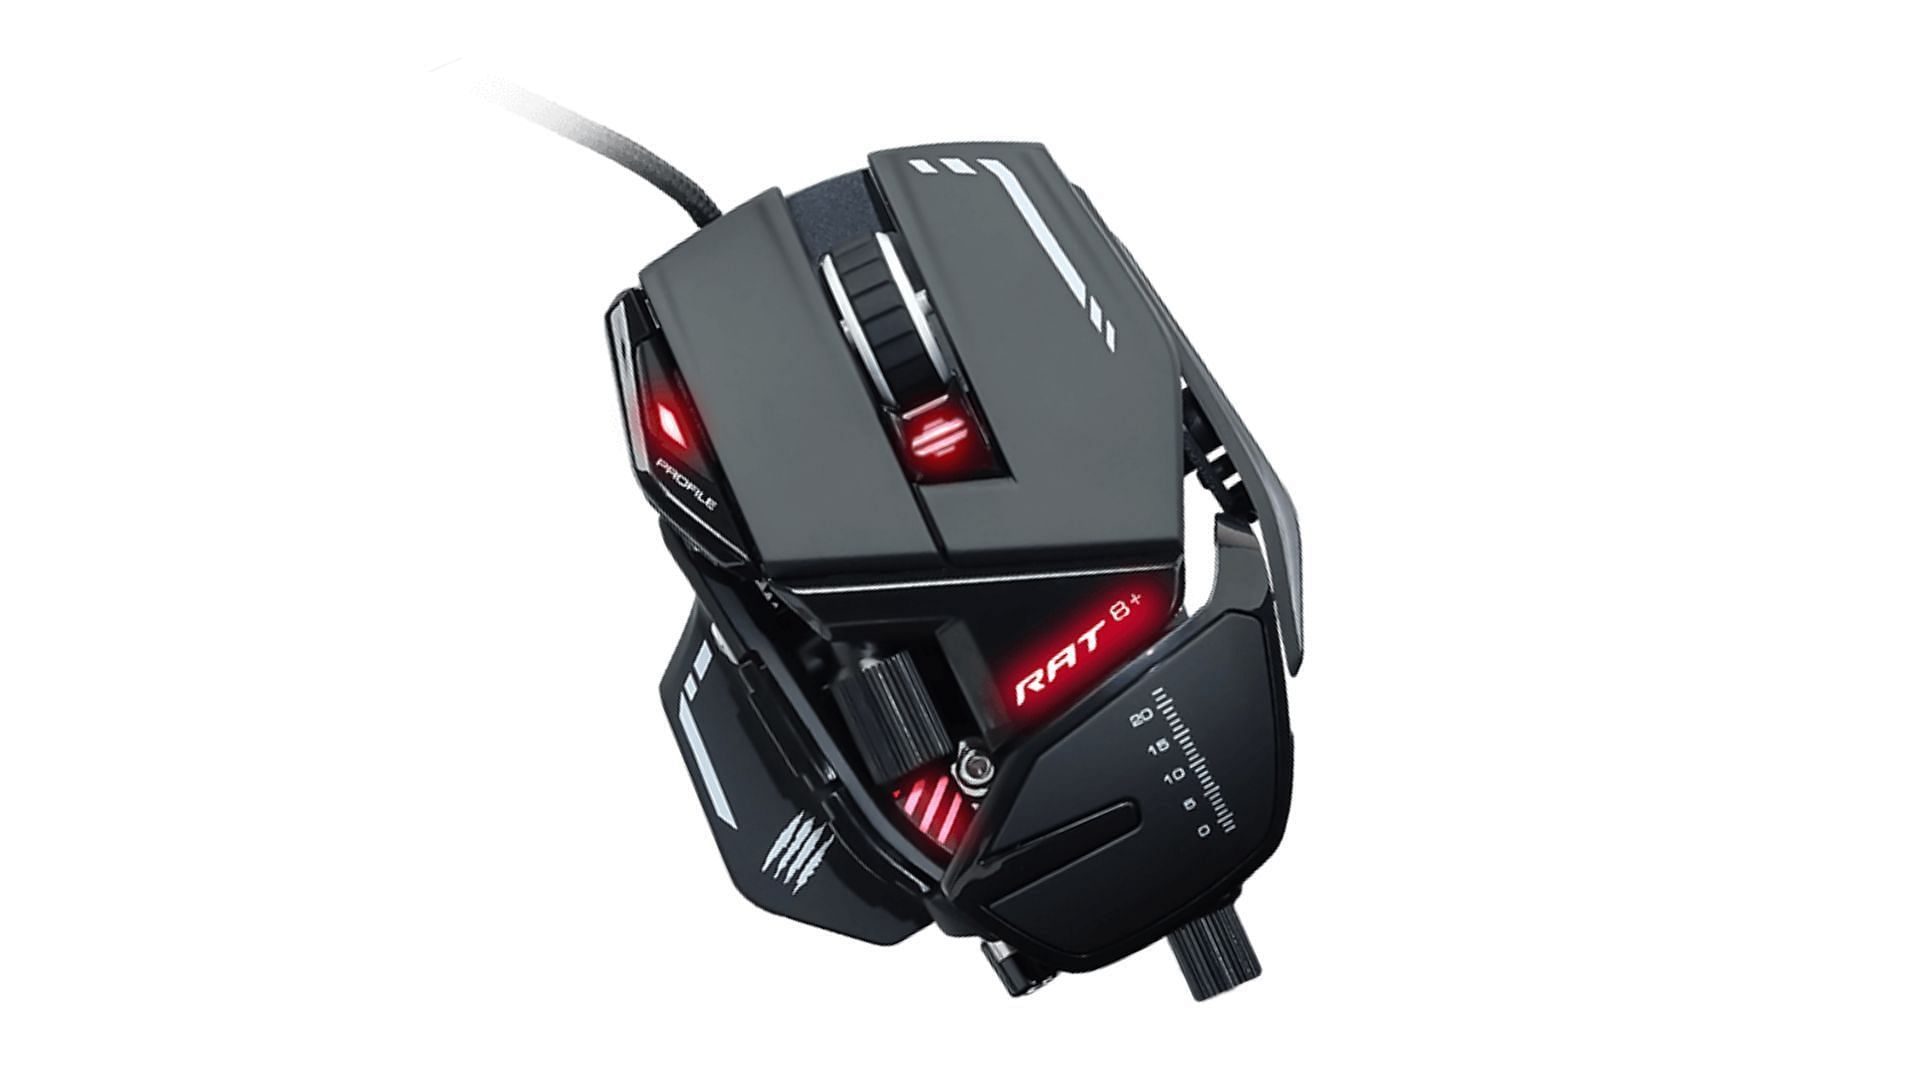 Mouse with a unique and futuristic look (Image via Mad Catz)